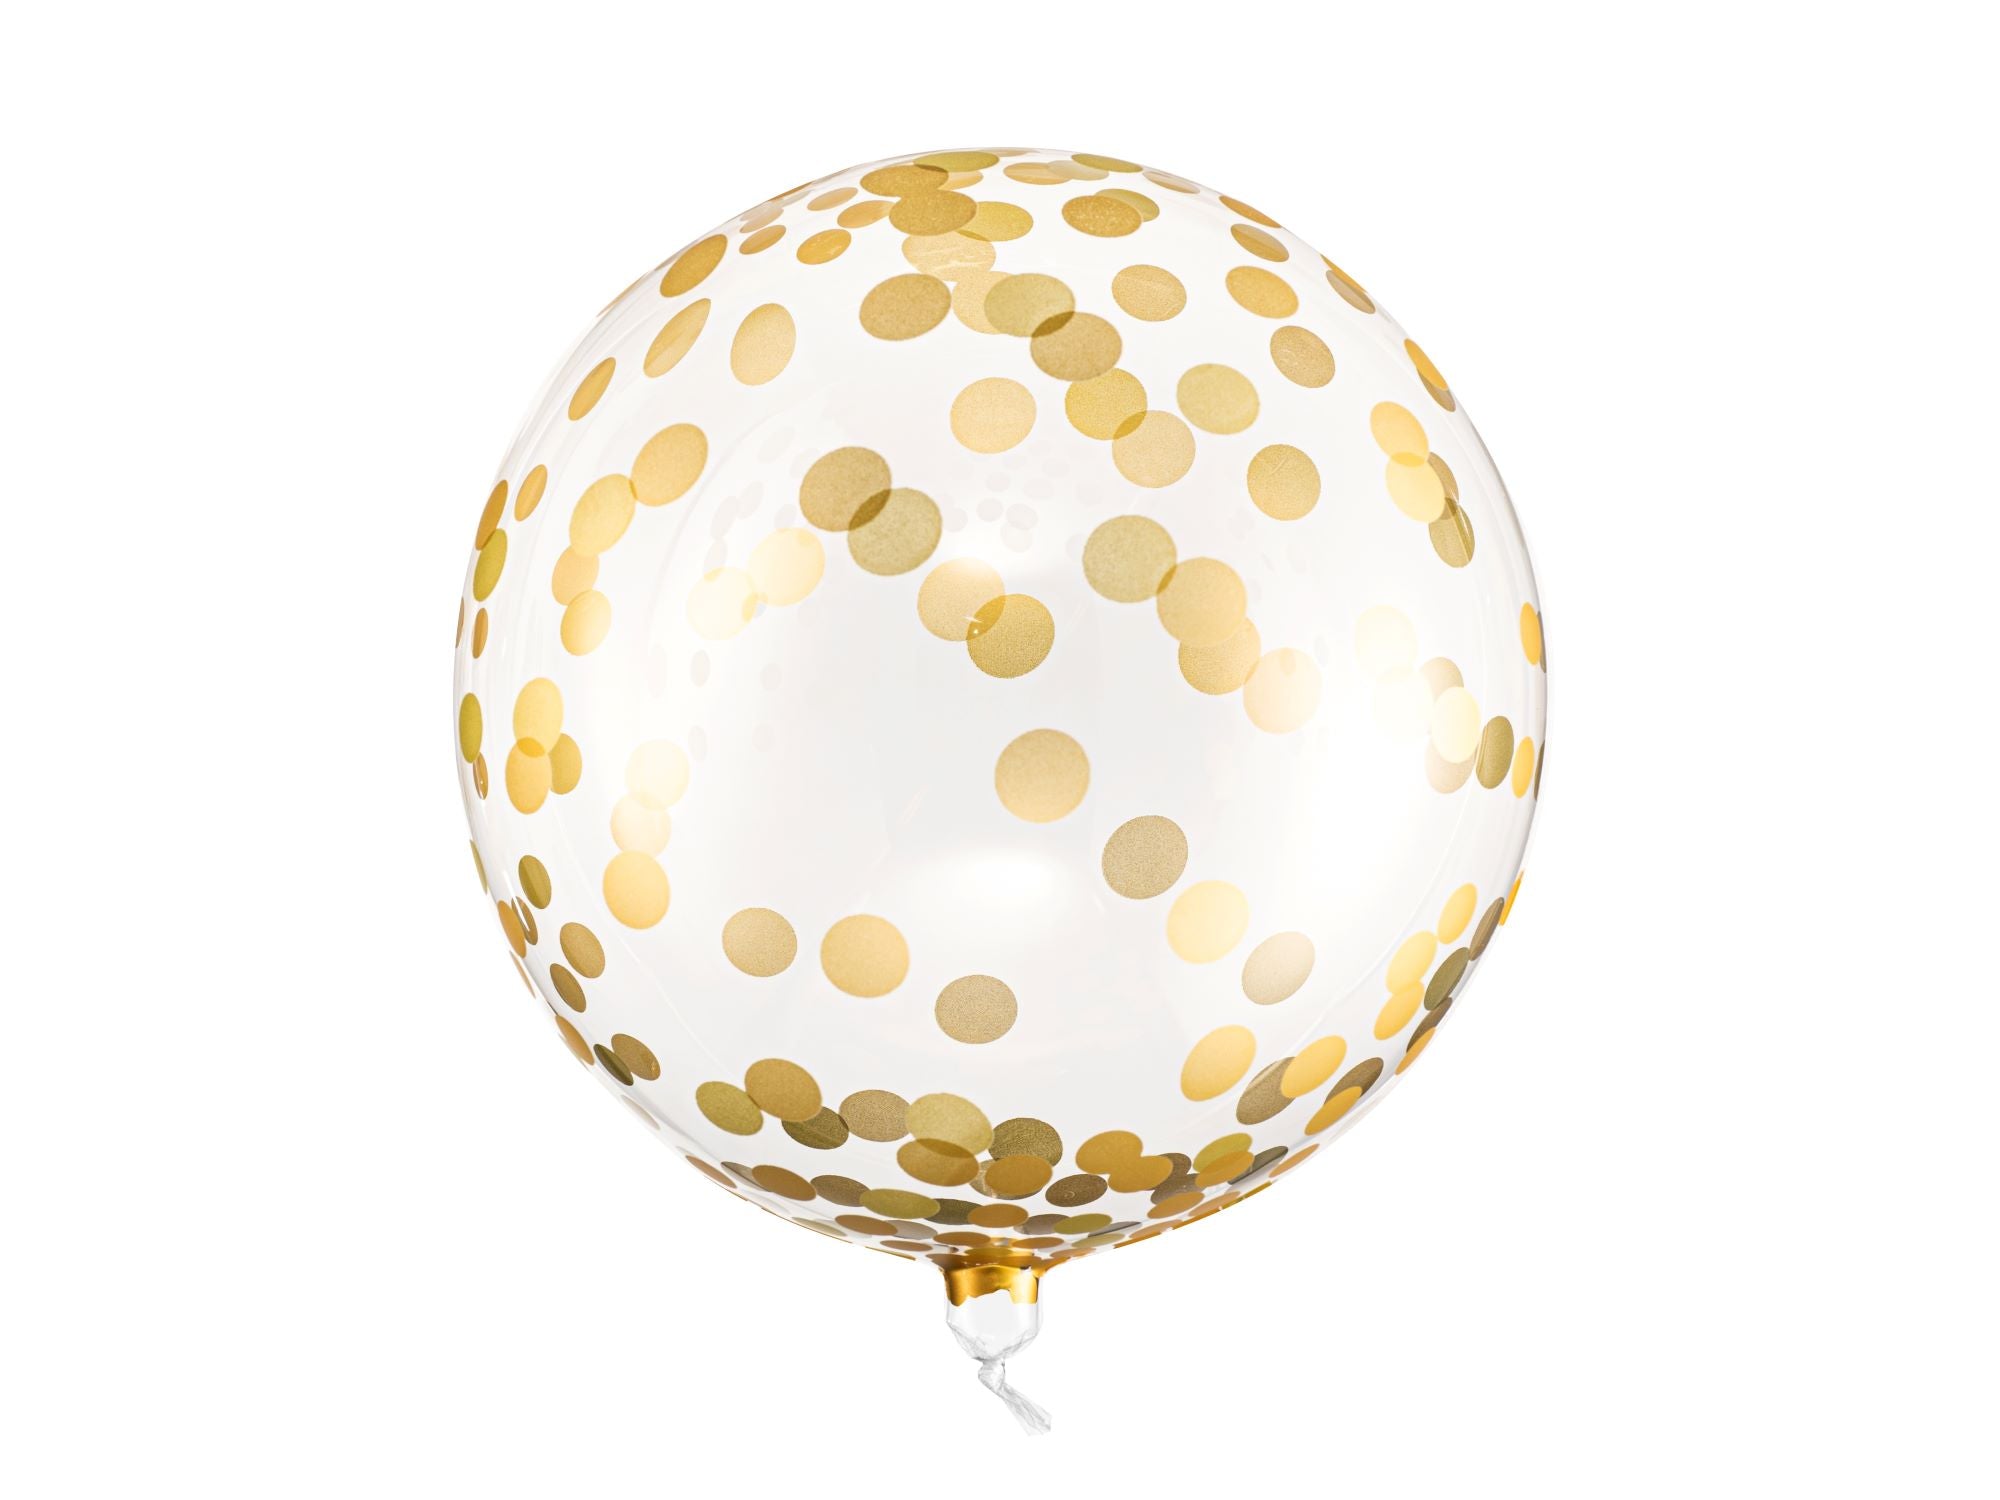 Orbz Balloon with Gold Dots 40cm